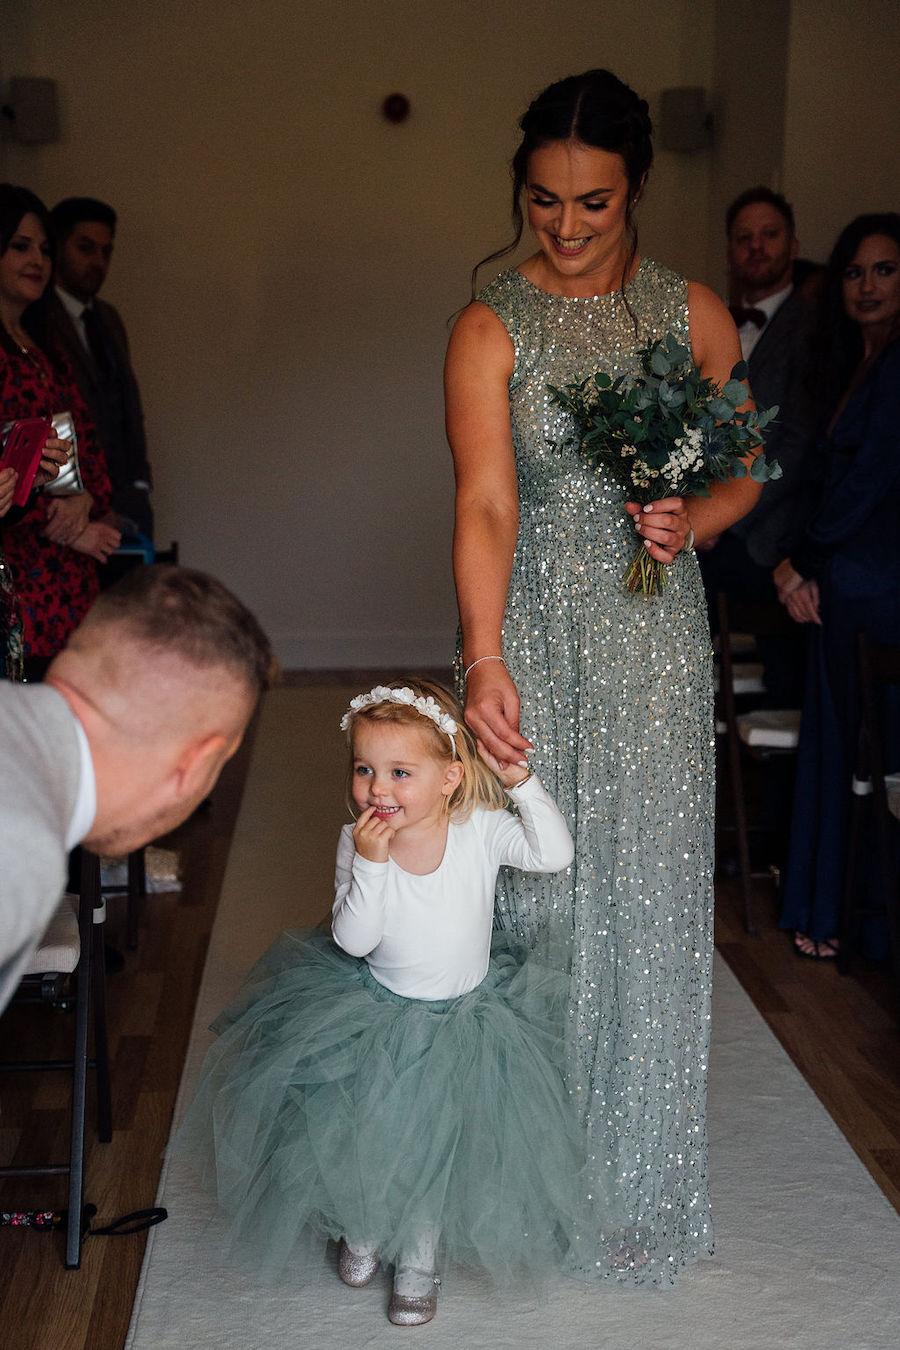 Adorable bridesmaid wearing a tutu walking down the aisle holding her mums hand.